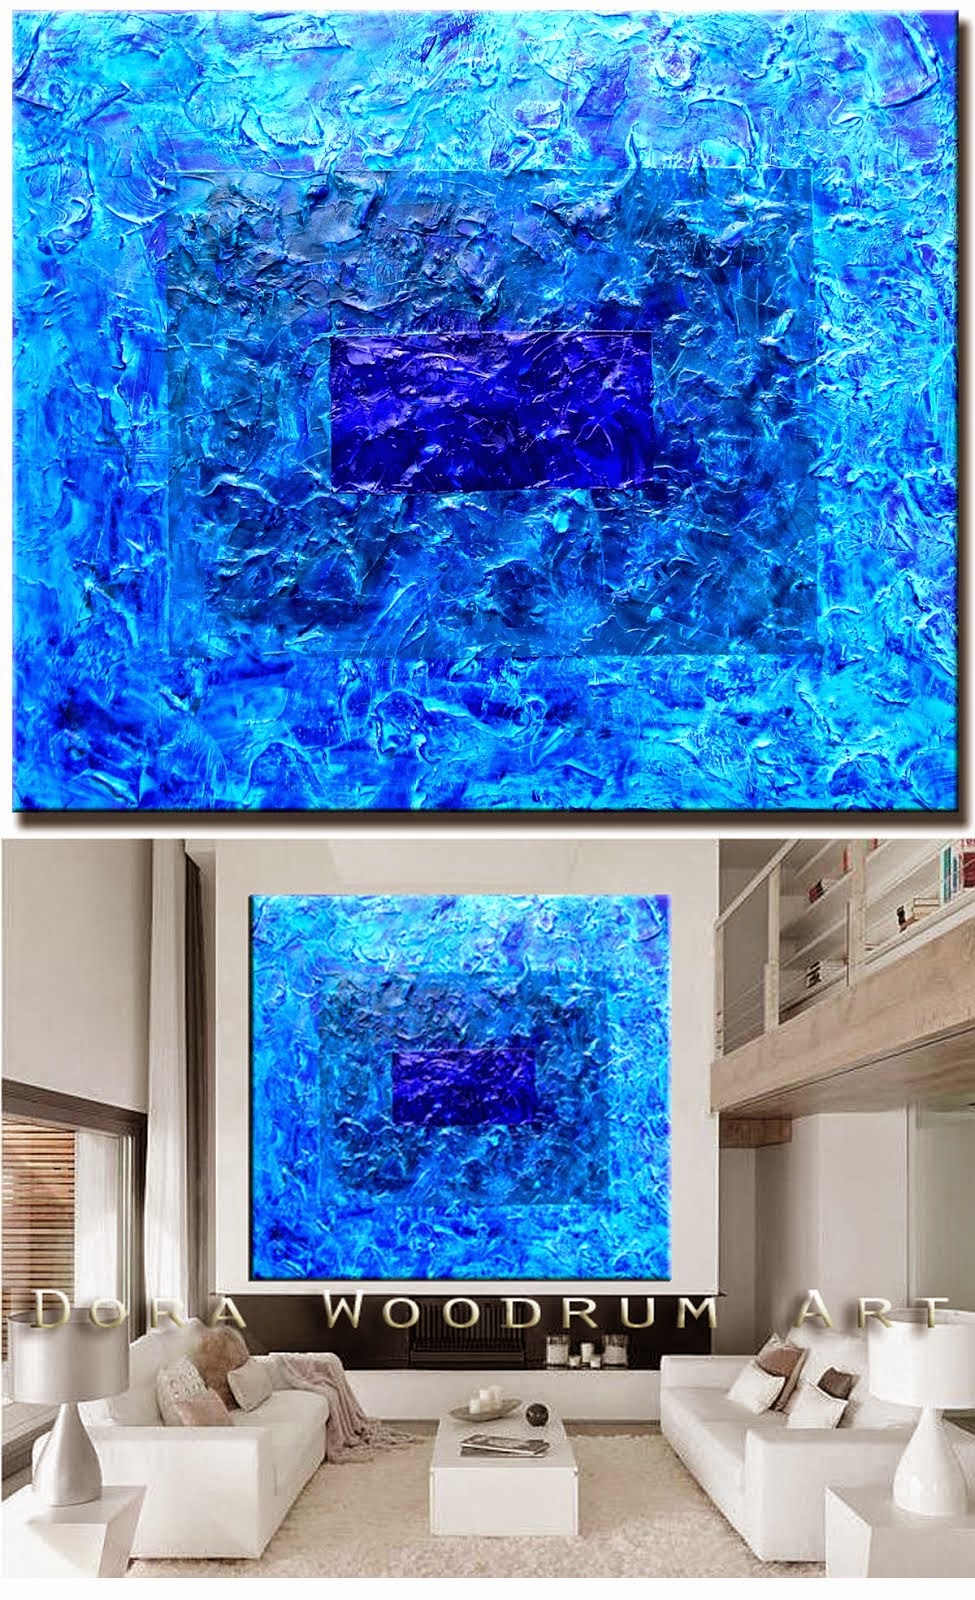 Abstract Painting "Miami Blue" by Dora Woodrum